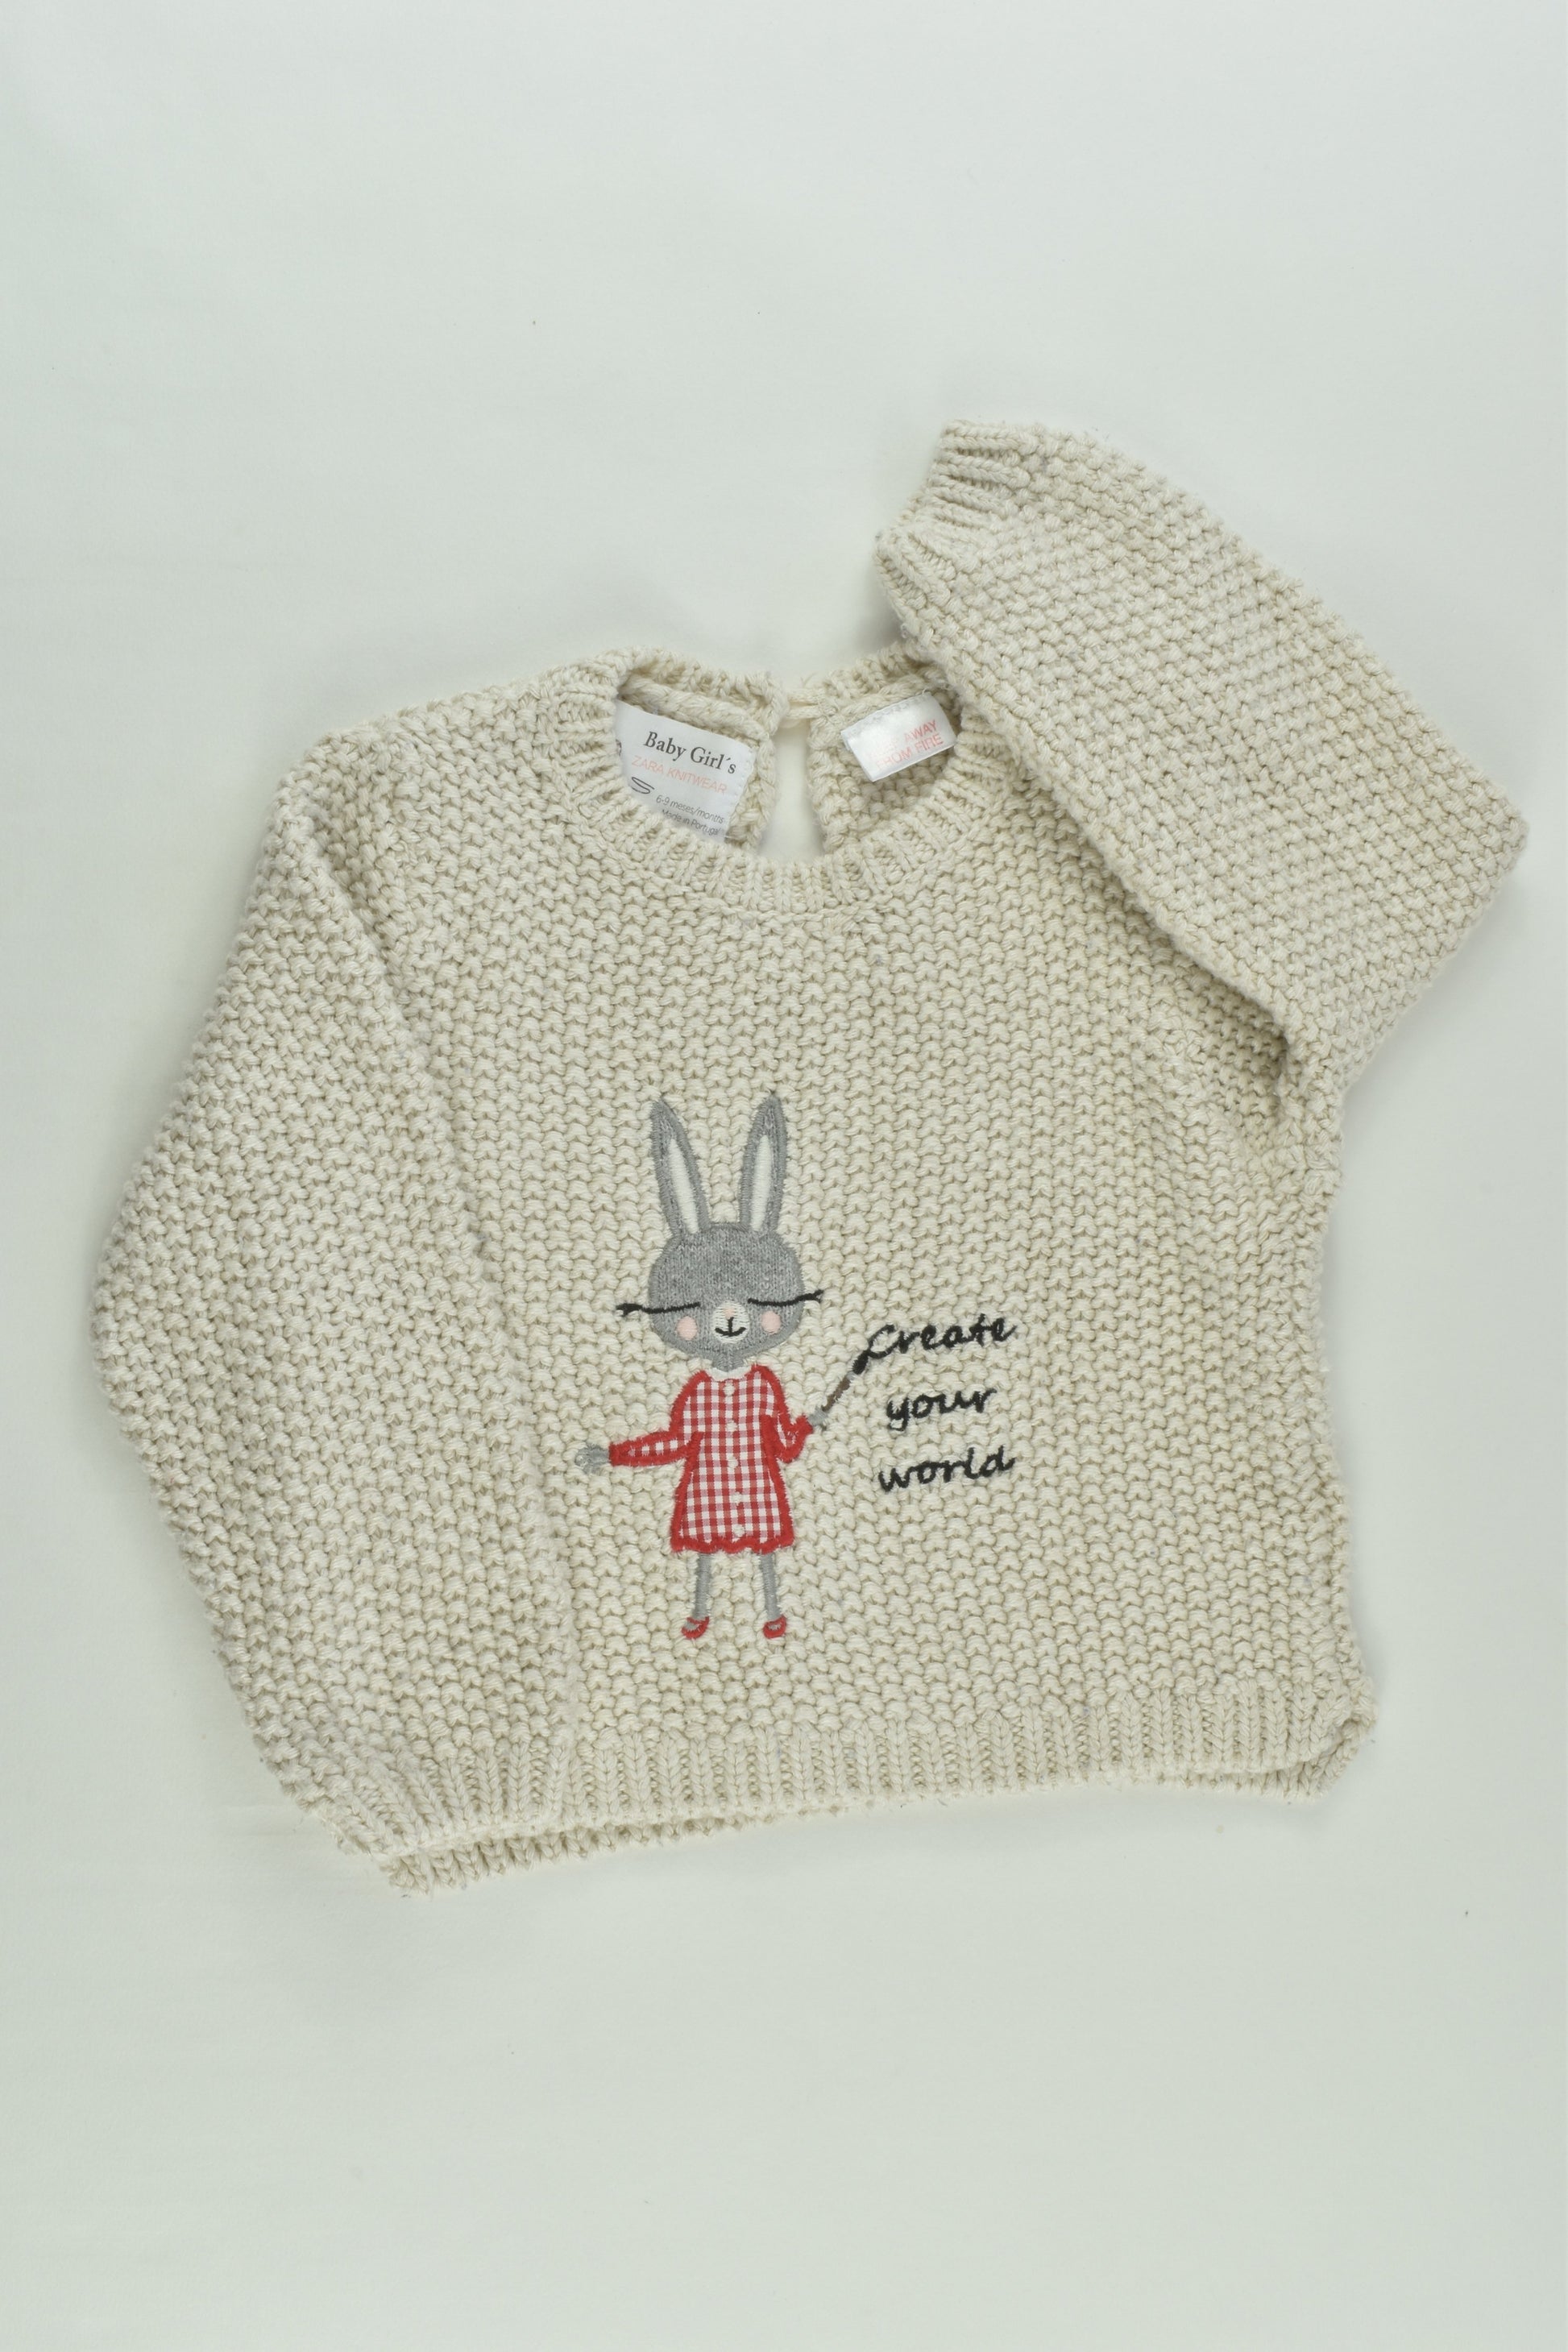 Zara Size 0 (74 cm) 'Create Your World' Knitted Jumper